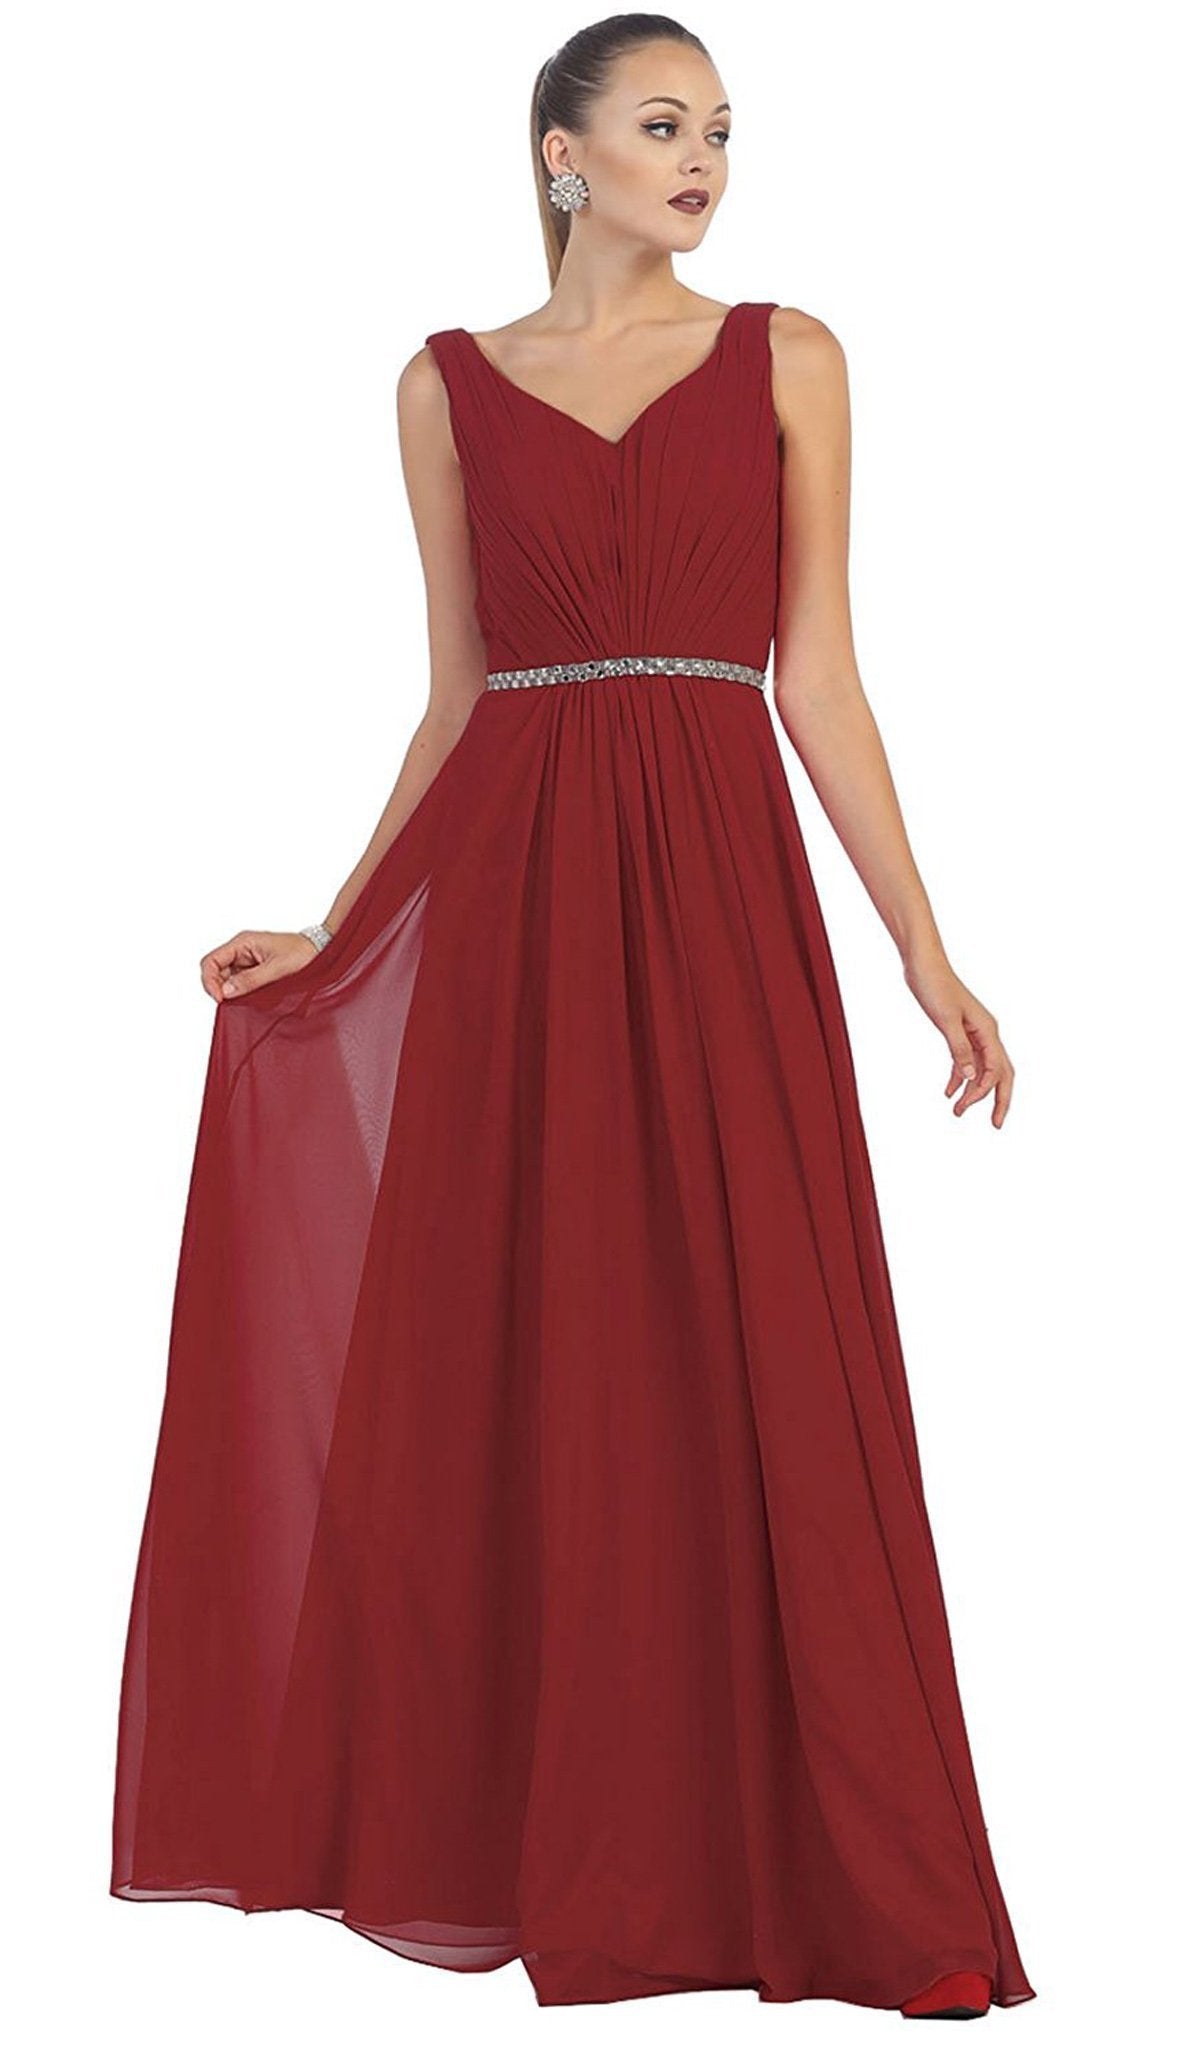 May Queen - Jeweled V-Neck Chiffon A-Line Prom Dress Special Occasion Dress 22 / Burgundy